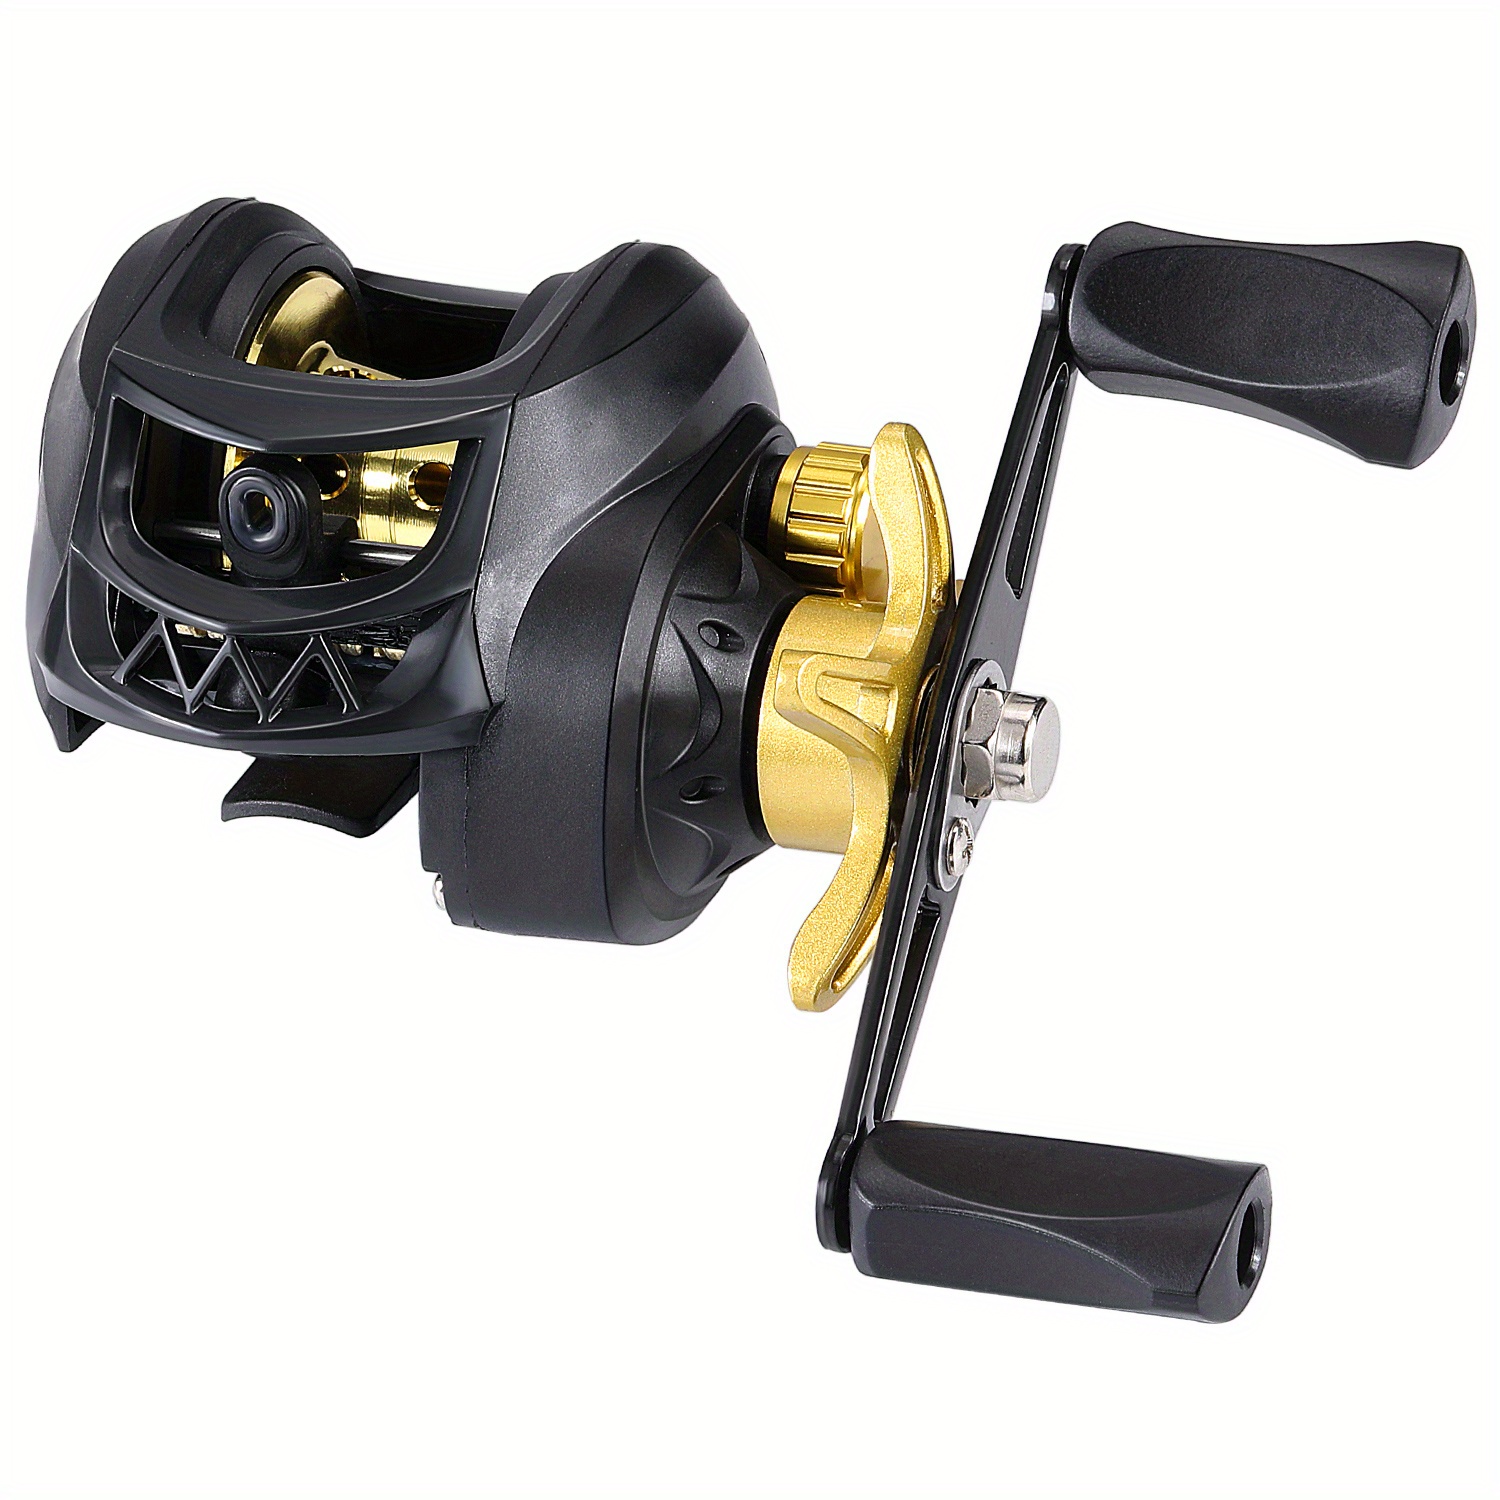 Hooked On Bait and Tackle - Silstar Coaster 9000 long cast surf reel now on  special for $59.95 saving you $40. Only 10 reels left.